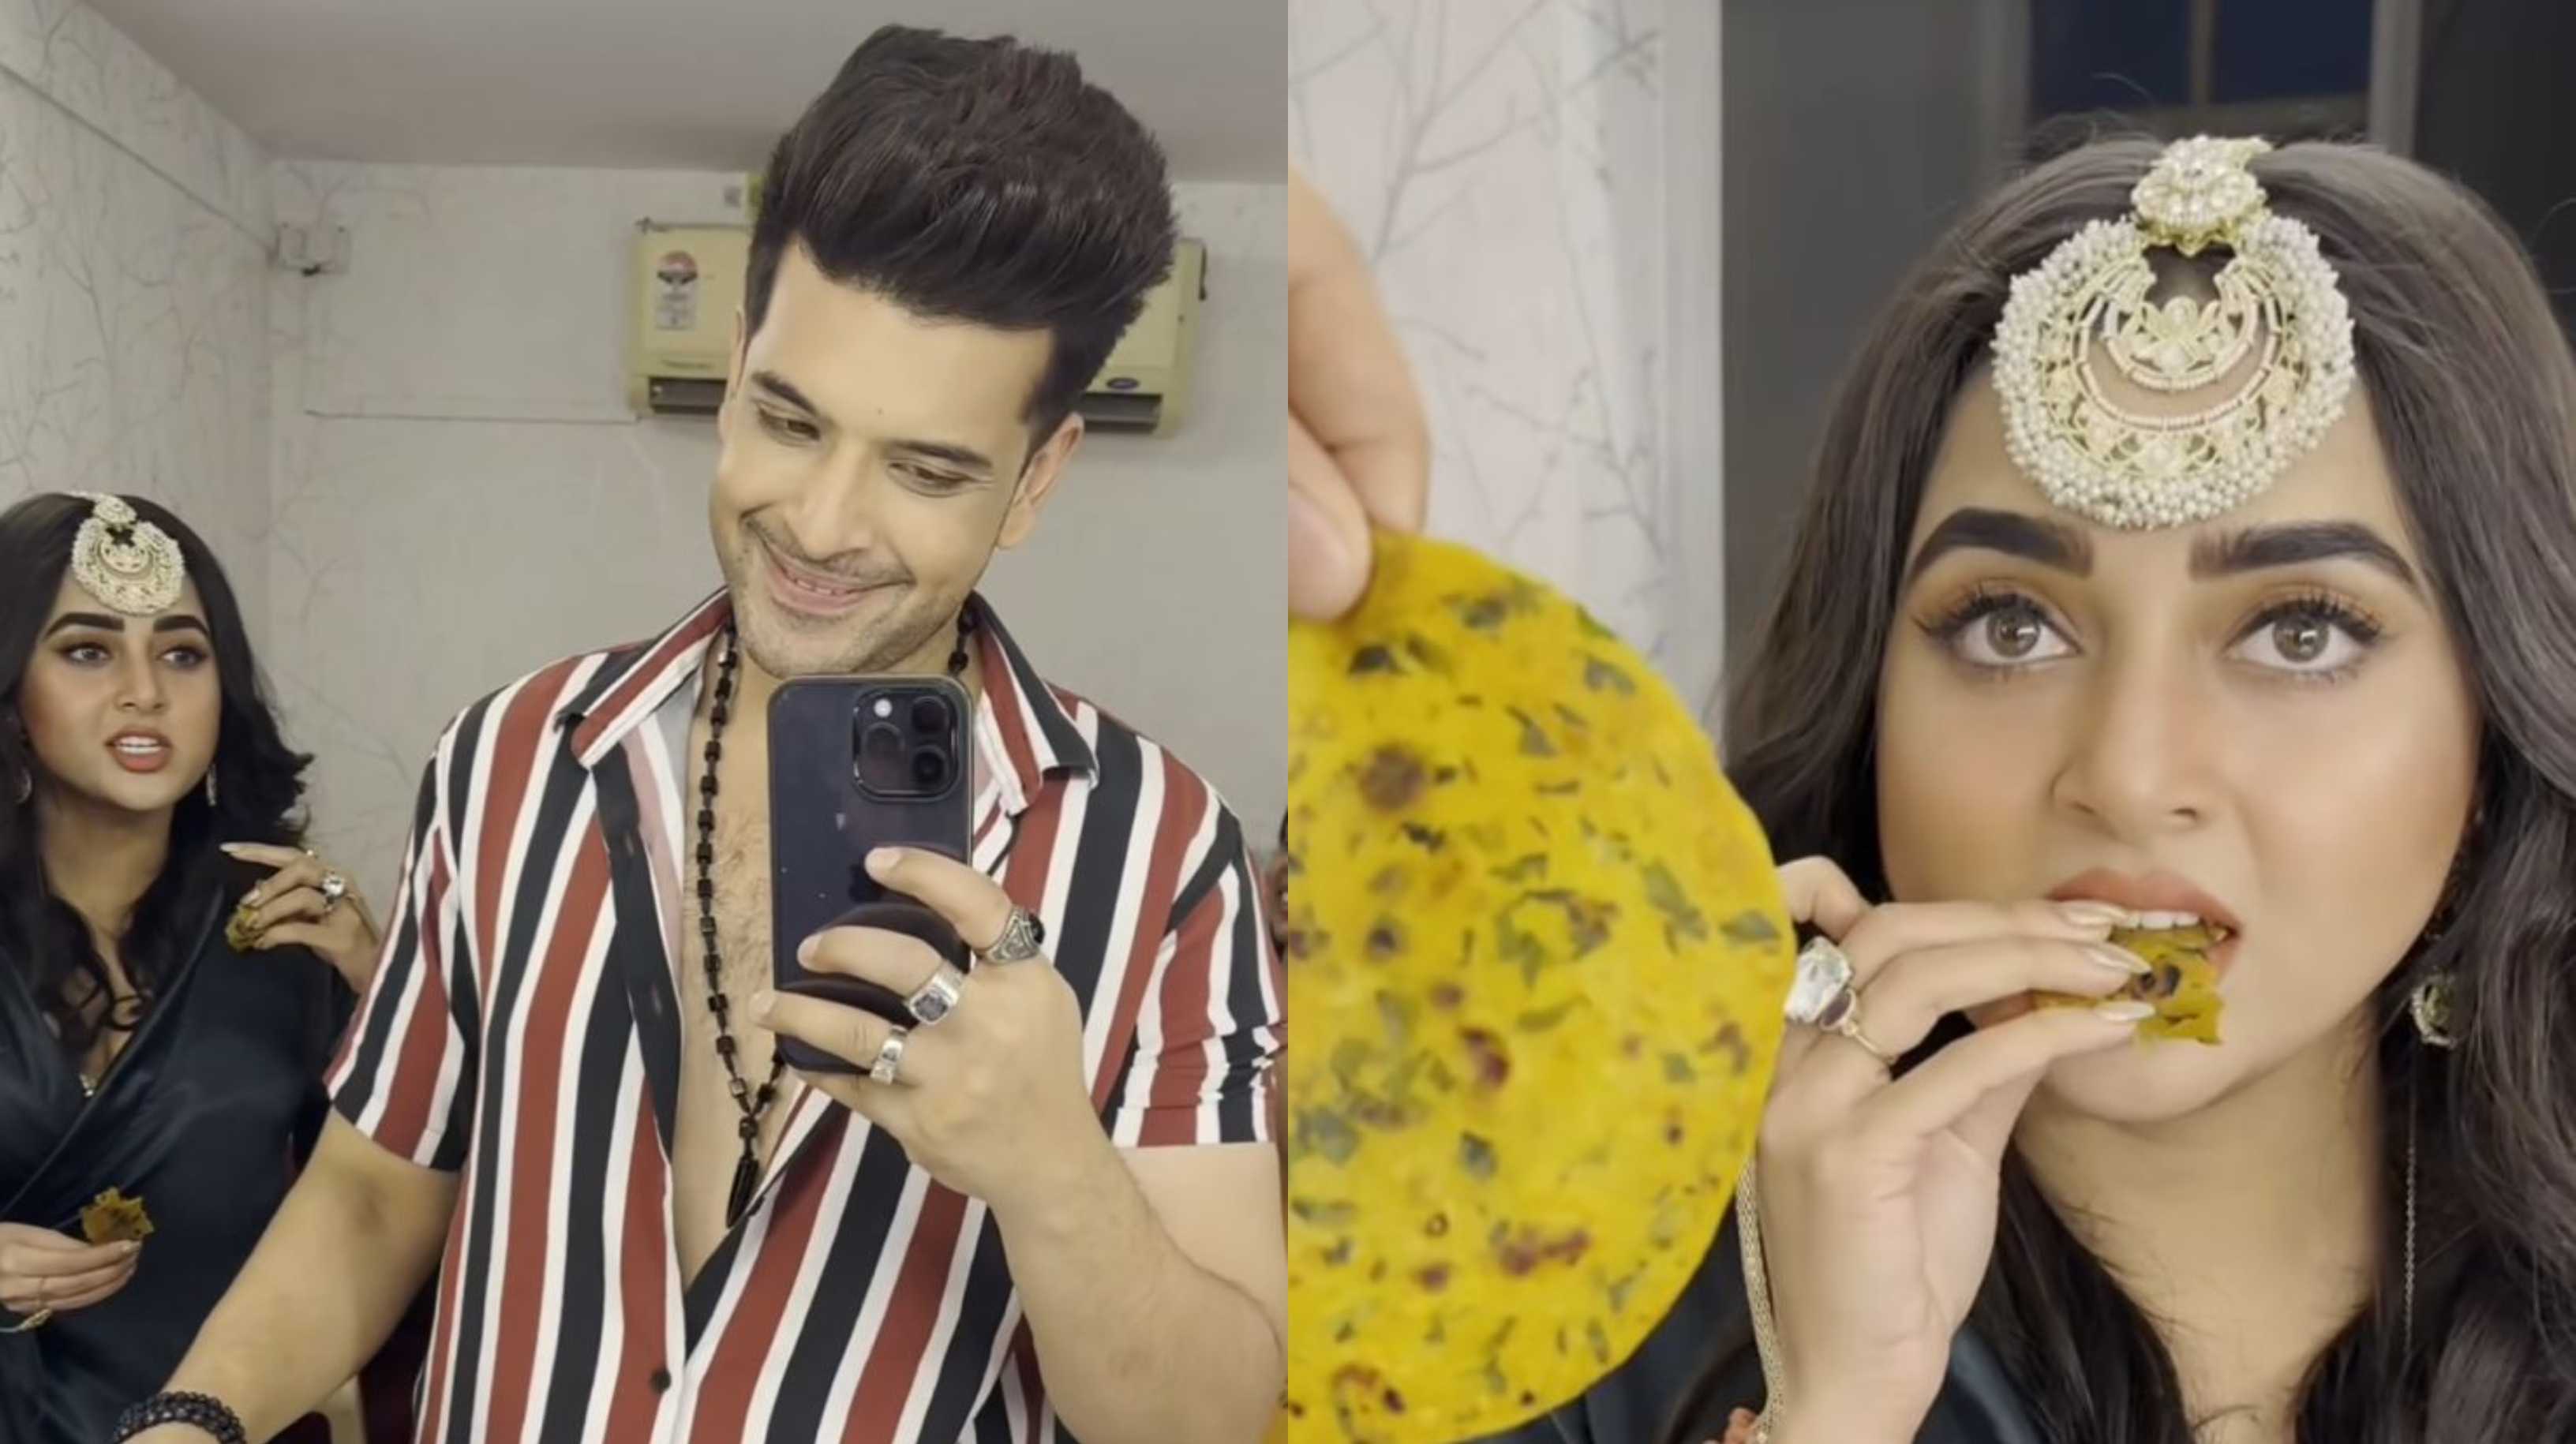 ‘What is rounder’: Karan Kundrra compares GF Tejasswi Prakash’s face to a thepla in BTS video; watch